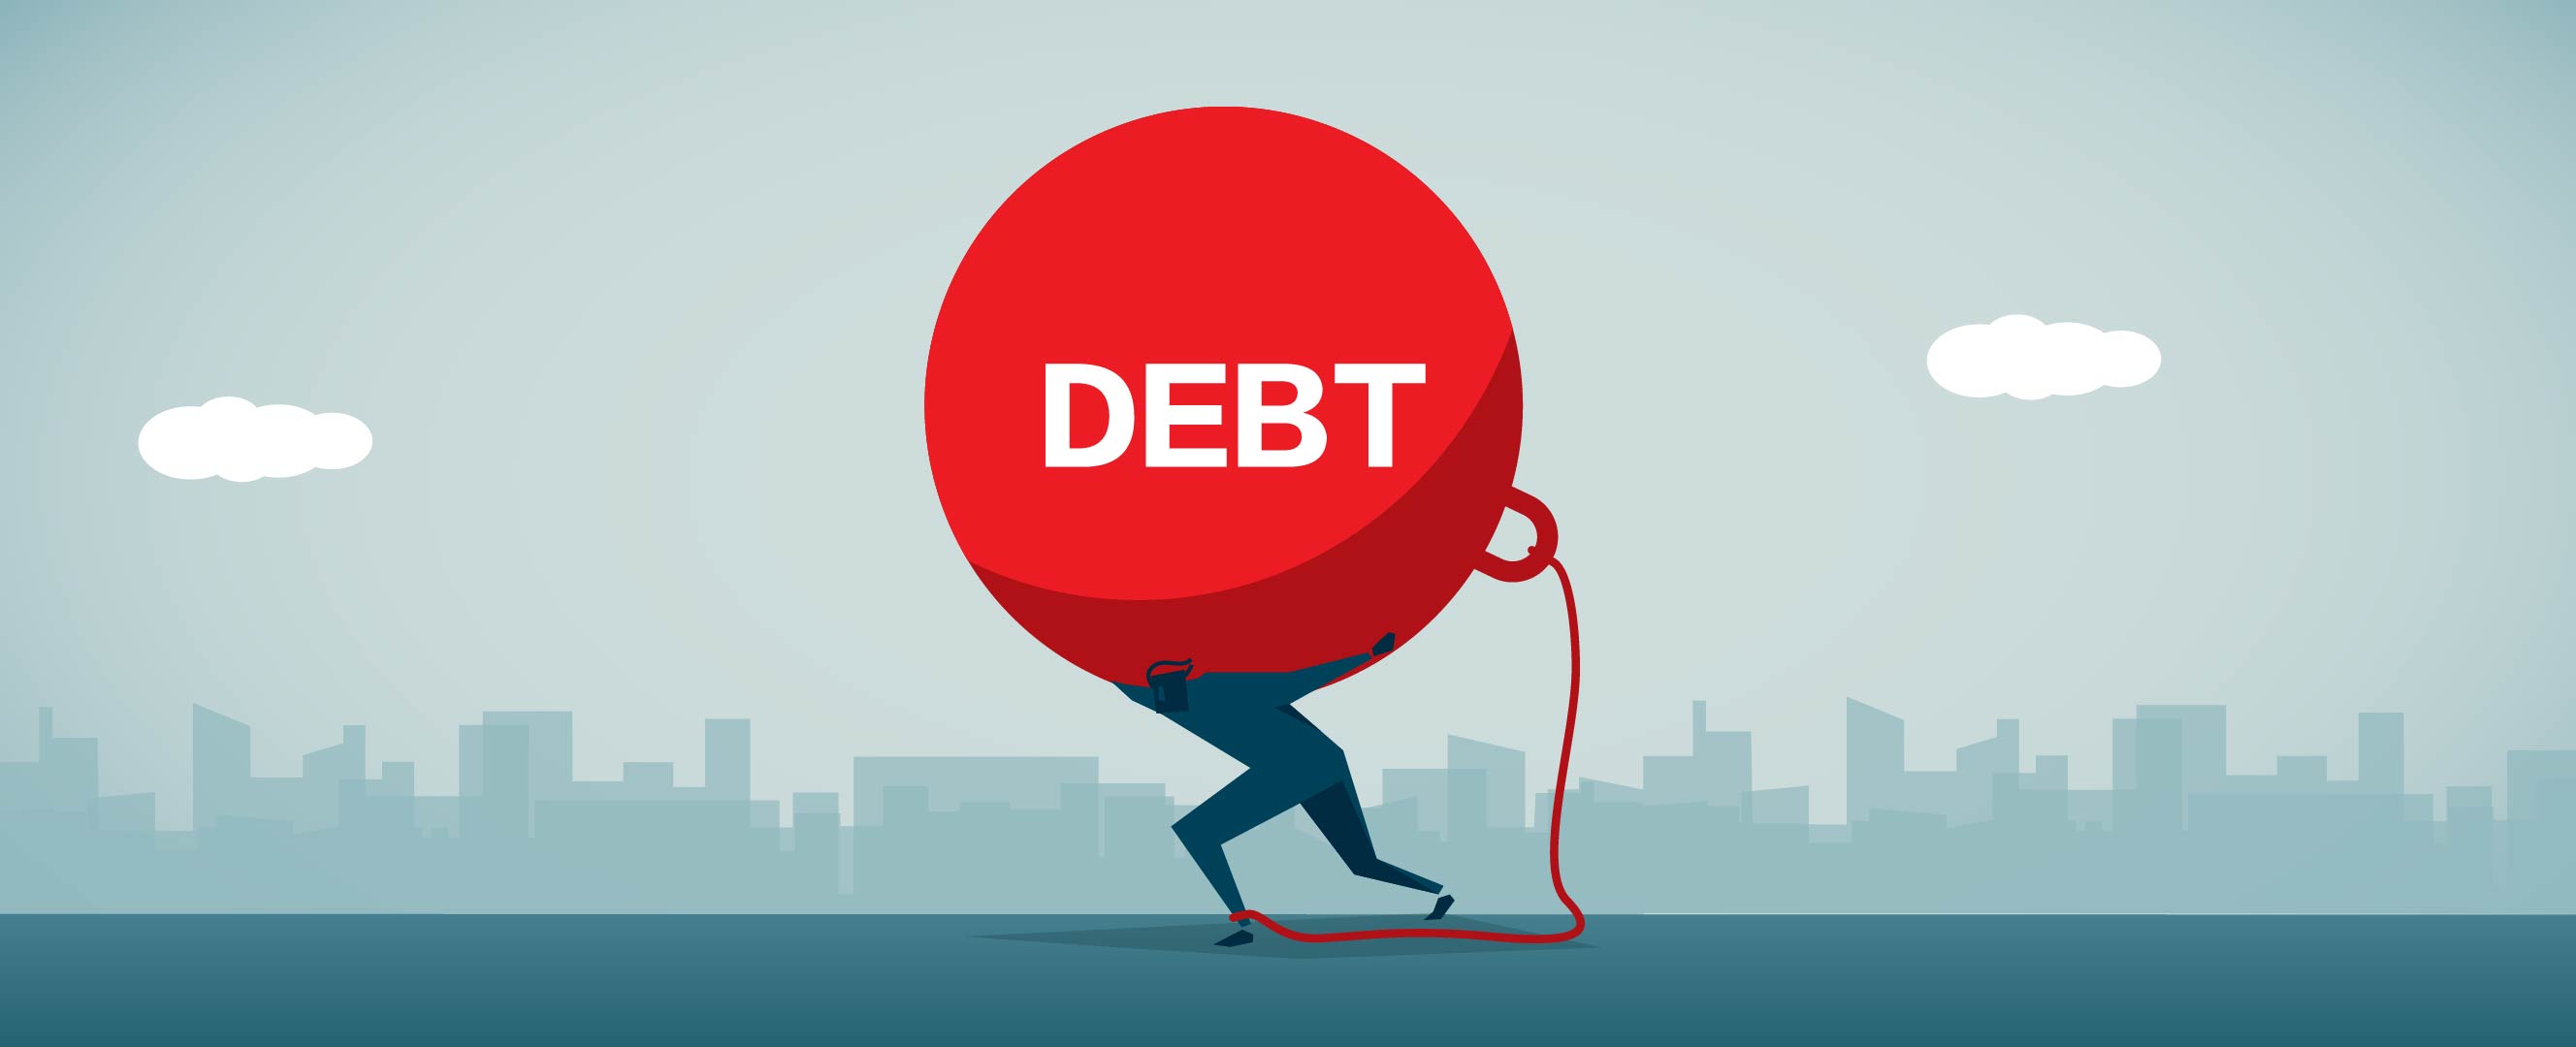 Control Debt and Spending To Avoid Issues